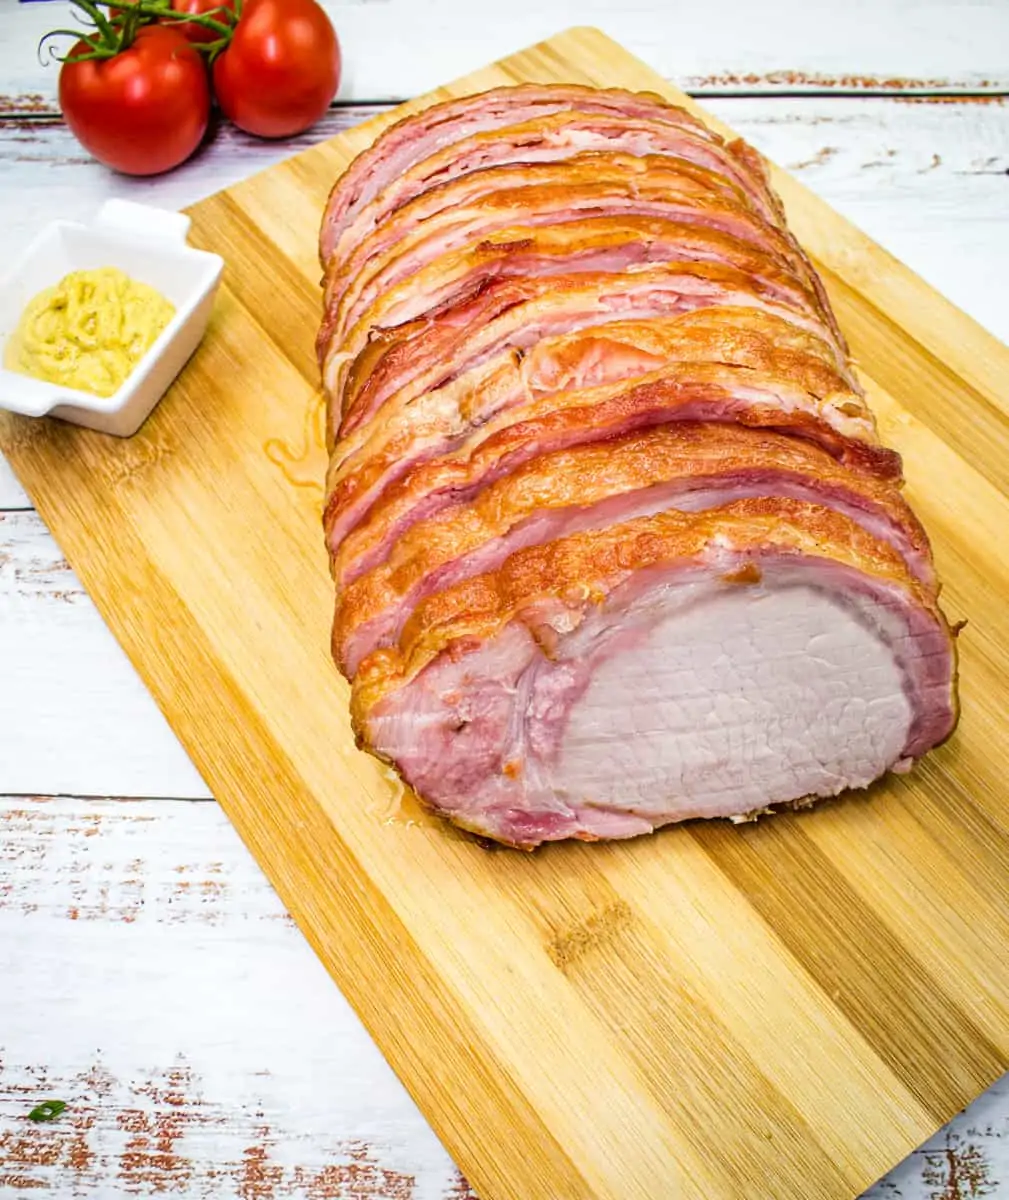 smoked bacon wrapped pork loin on a cutting board